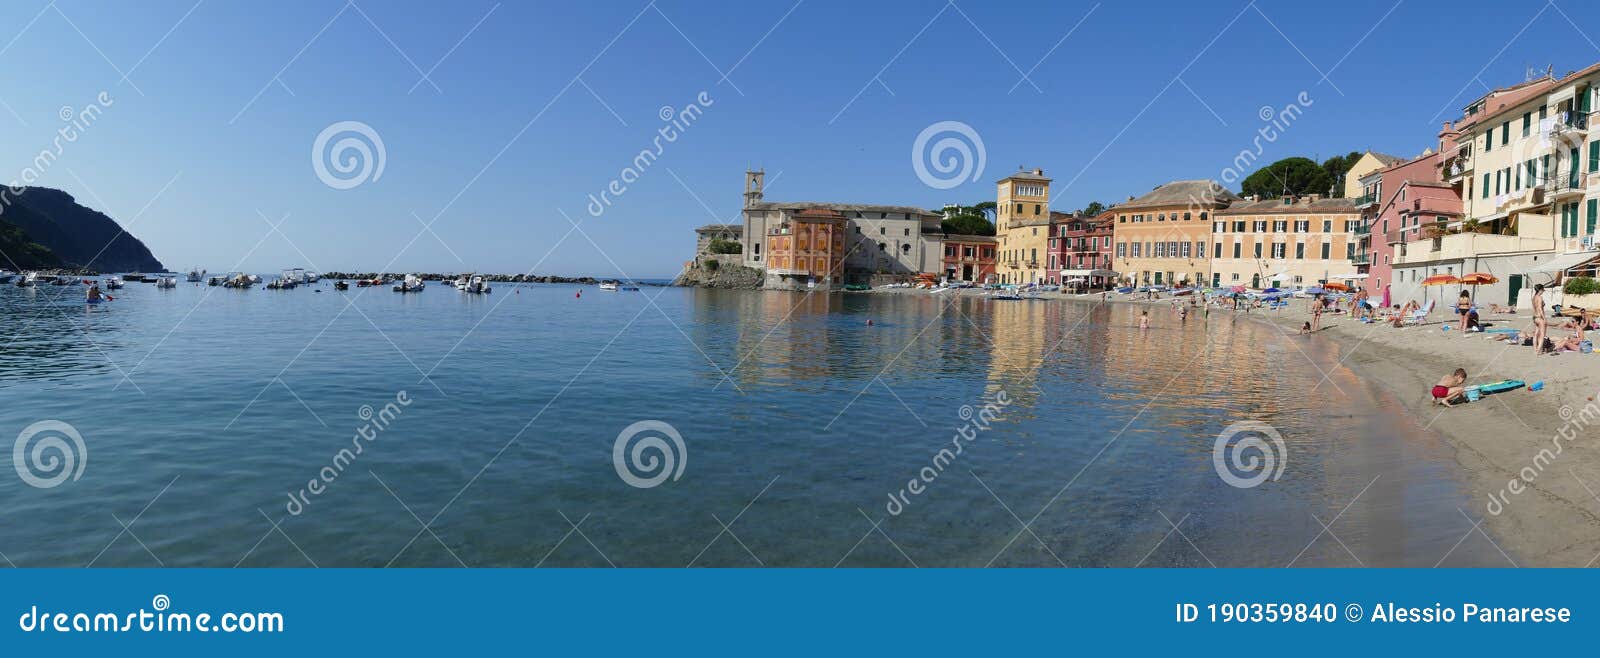 The Beach of Silence in Sestri Levante Editorial Image - Image of ...